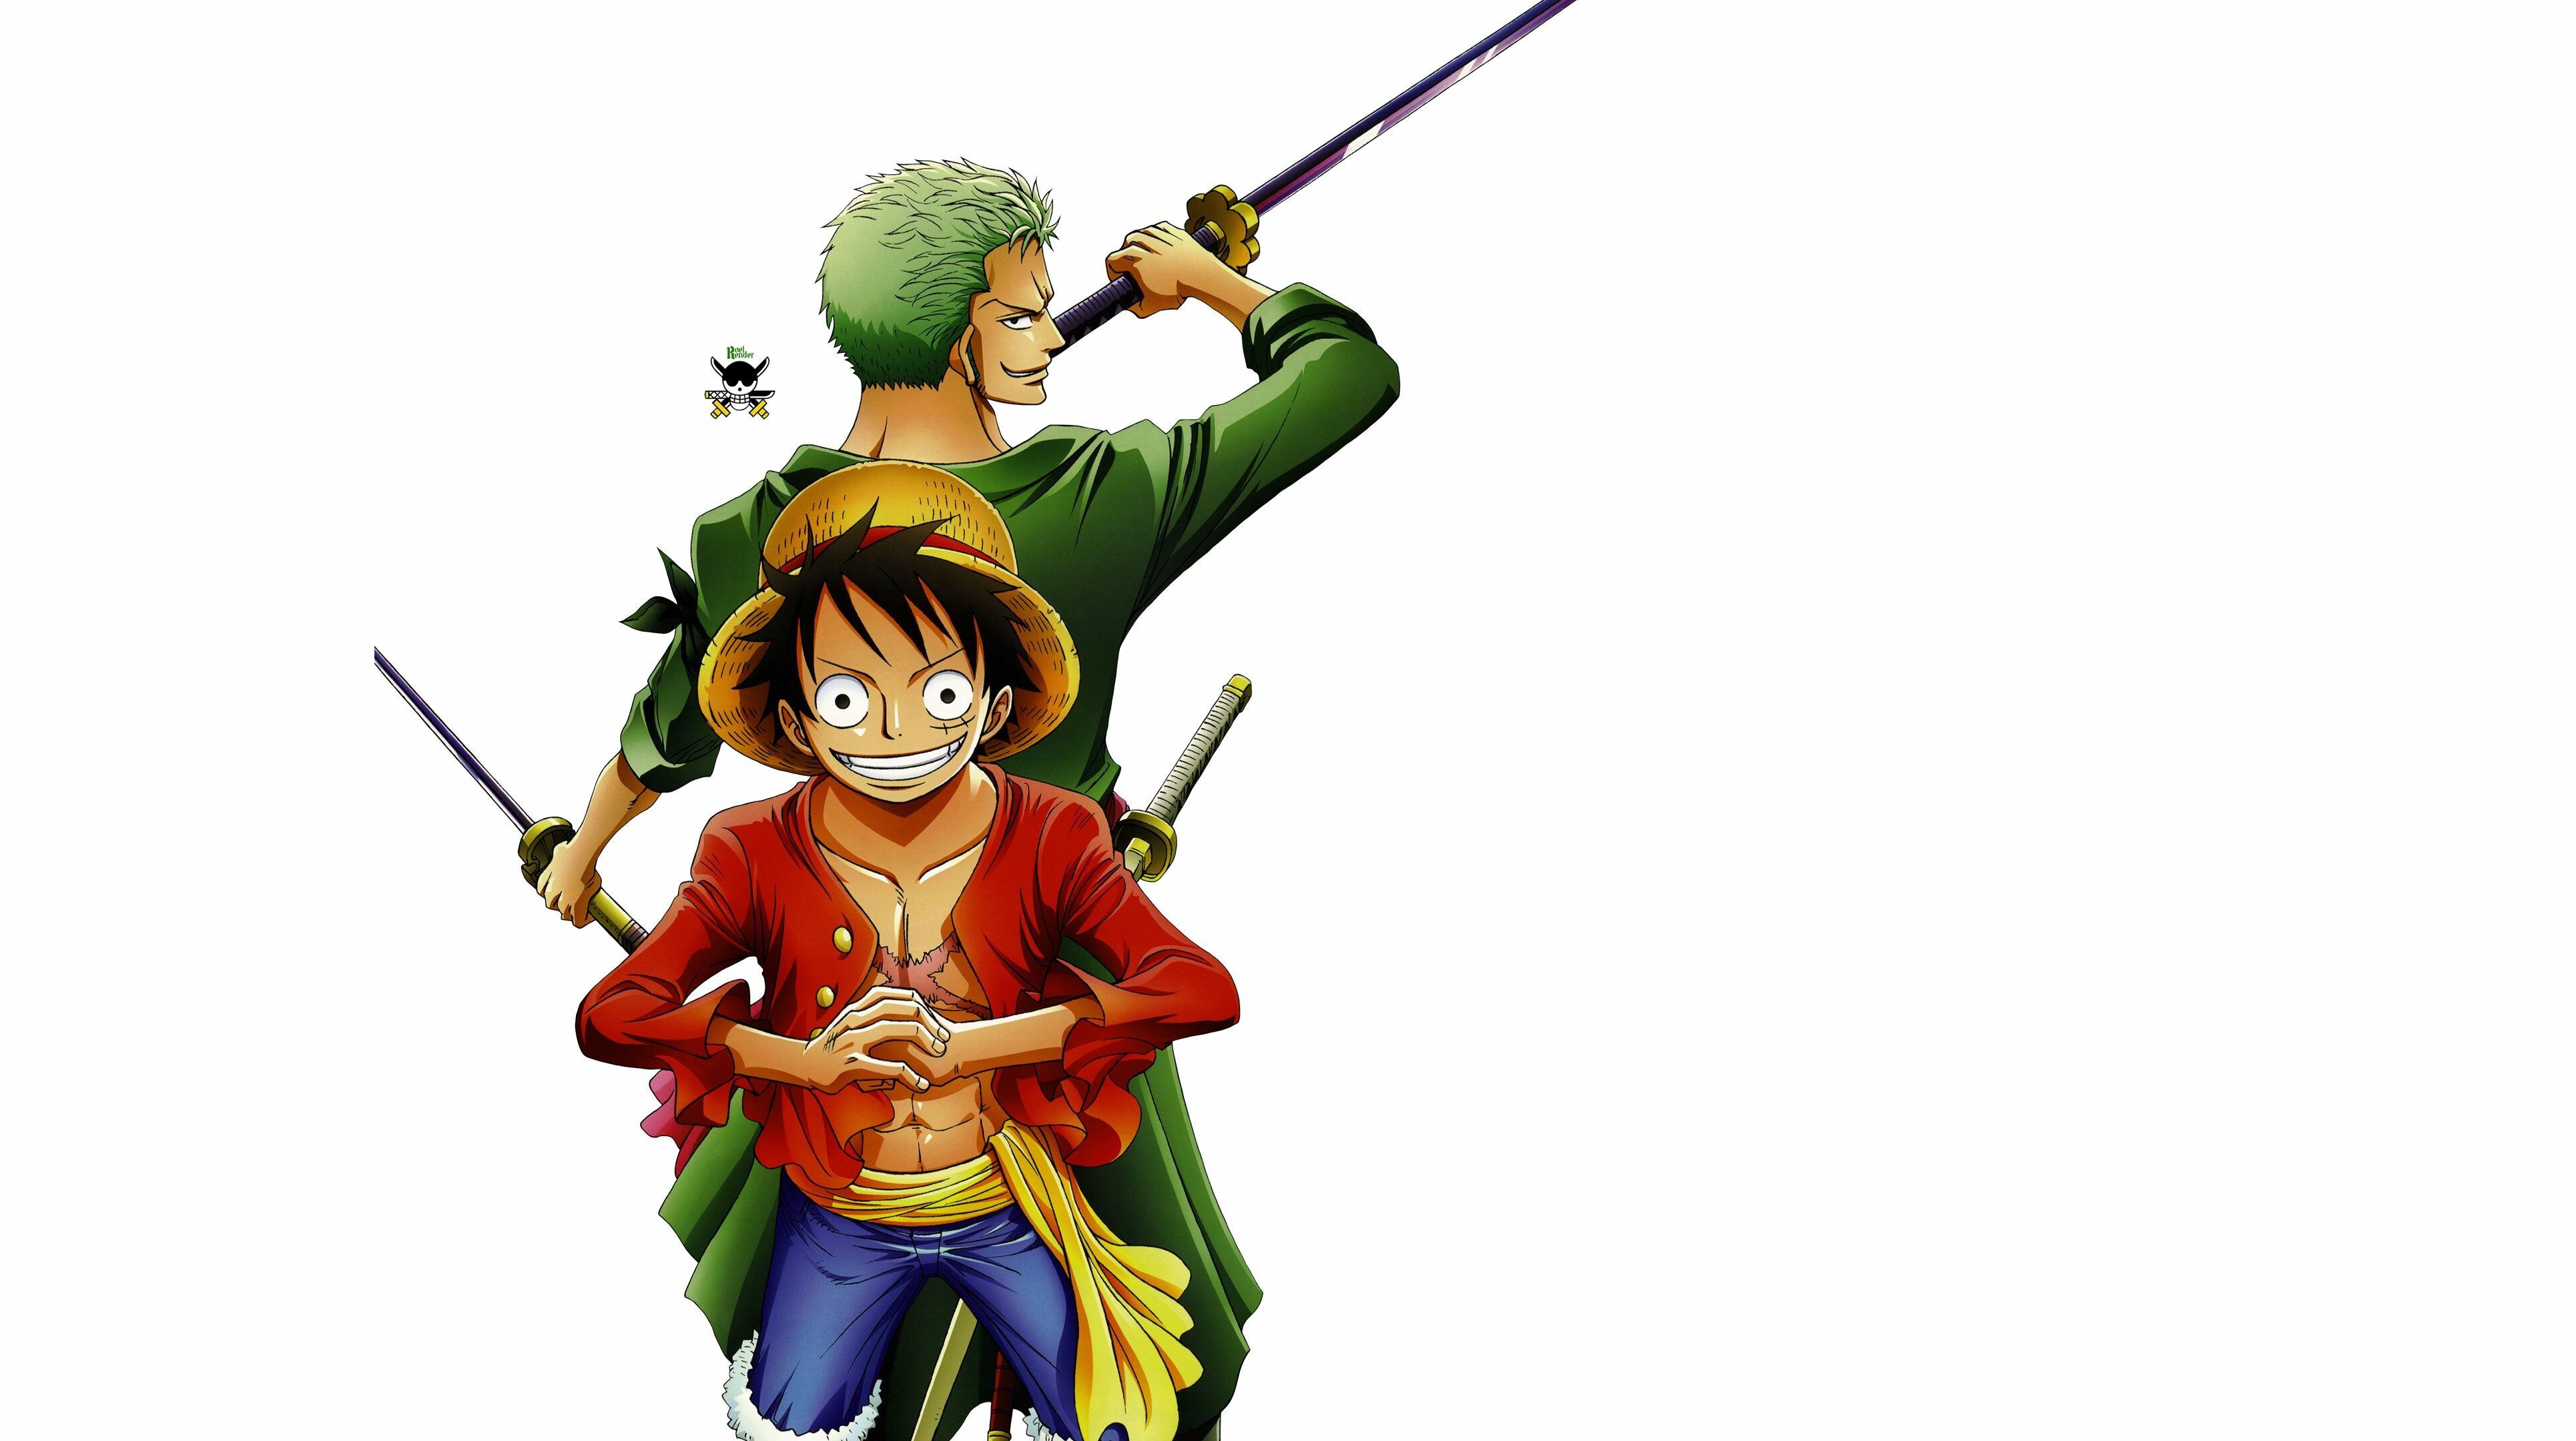 Zoro HD Wallpaper: HD, 4K, 5K for PC and Mobile. Download free image for iPhone, Android